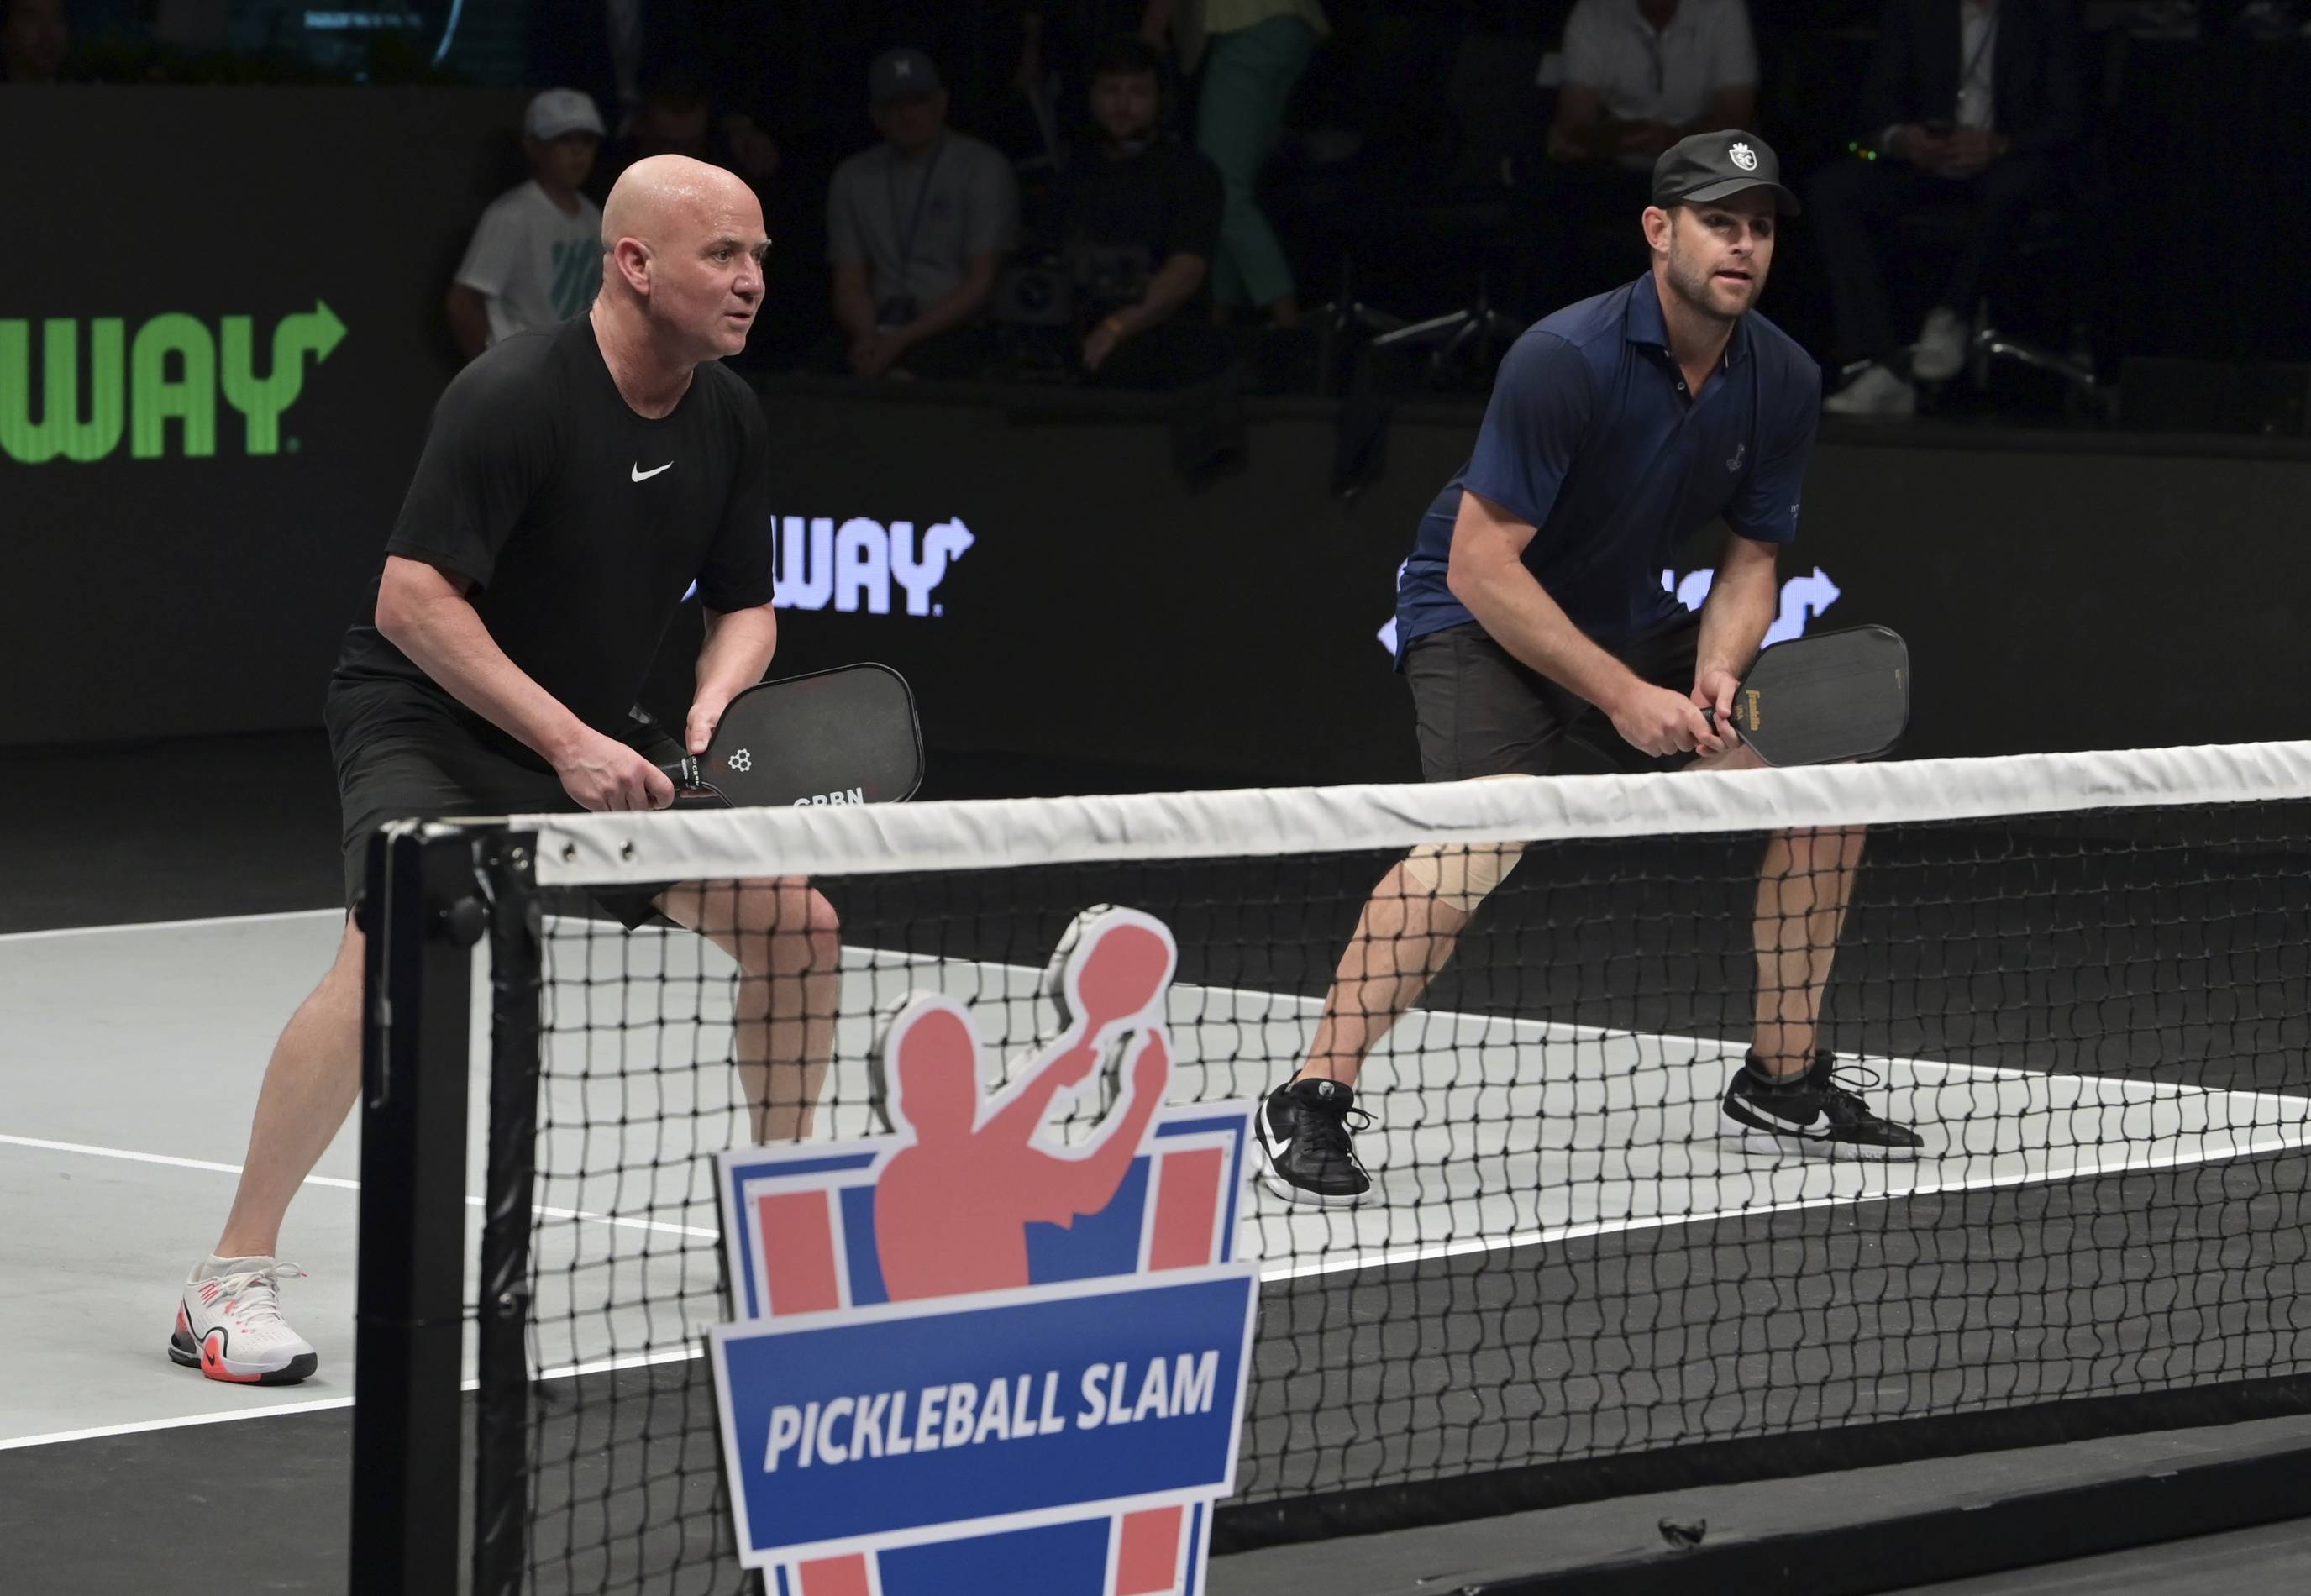 Andy Roddick and Andre Agassi play pickleball in Florida